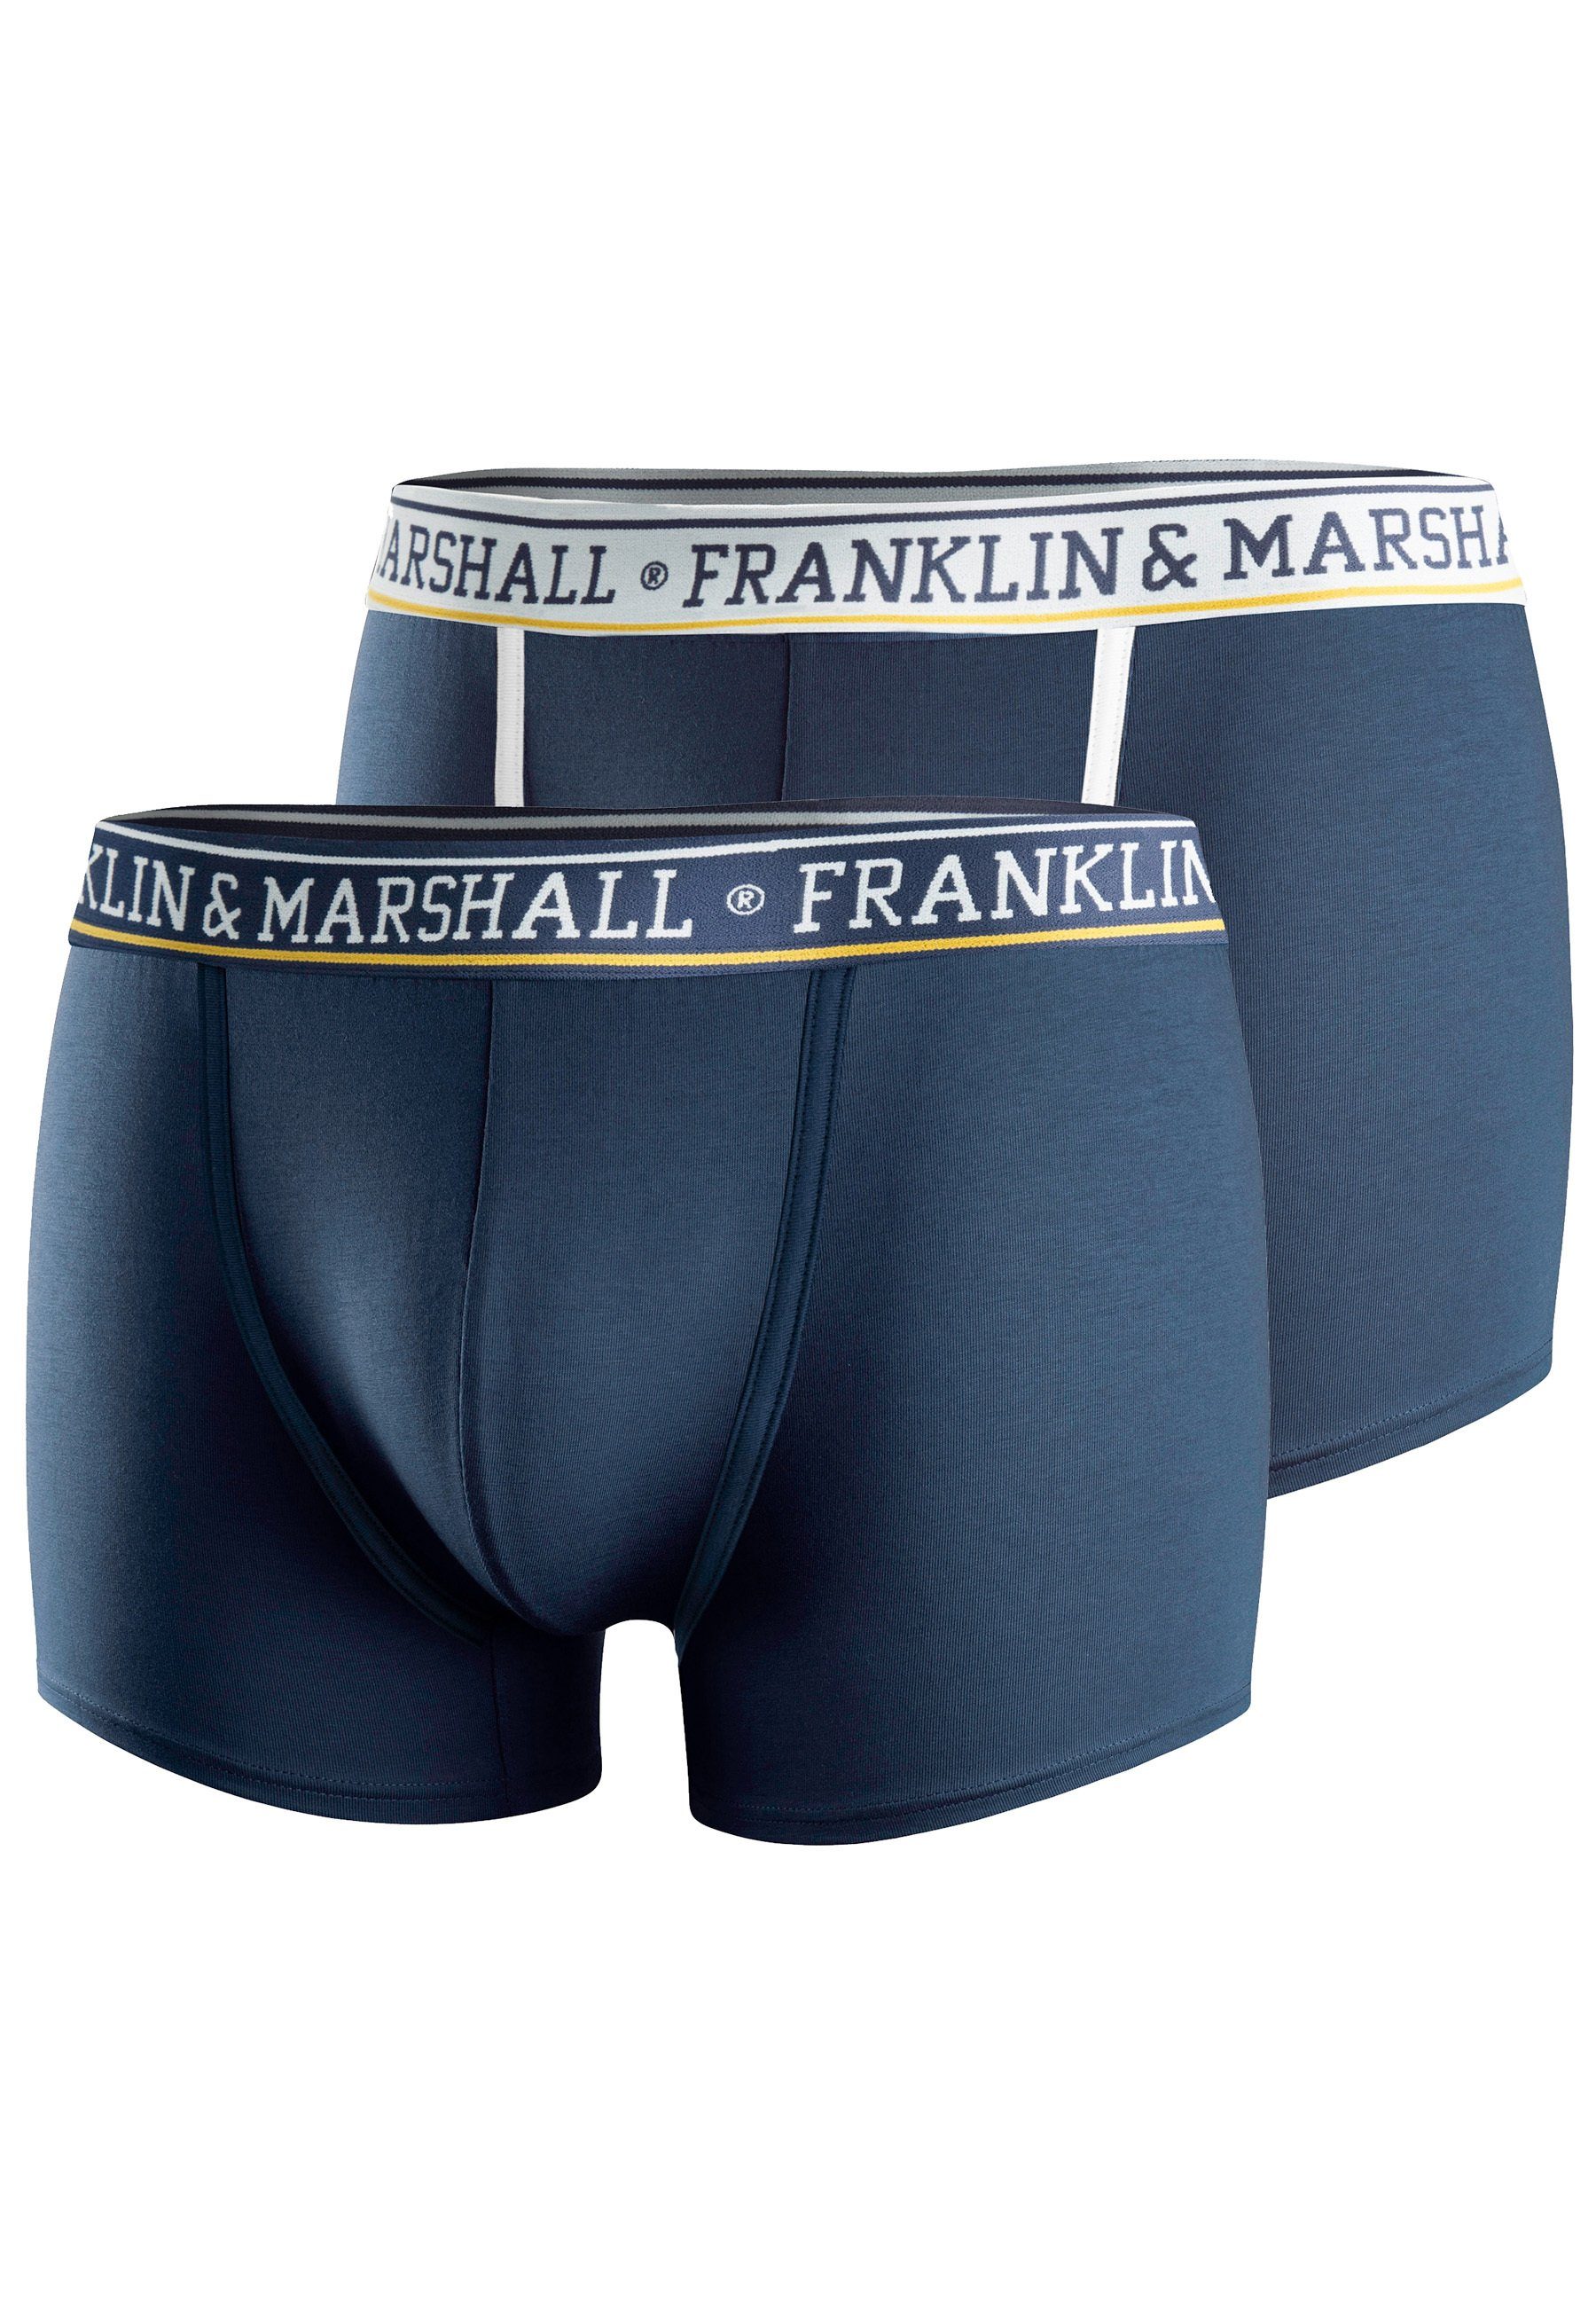 AND MARSHALL Boxershorts Blau Northern (1-St) Point FRANKLIN